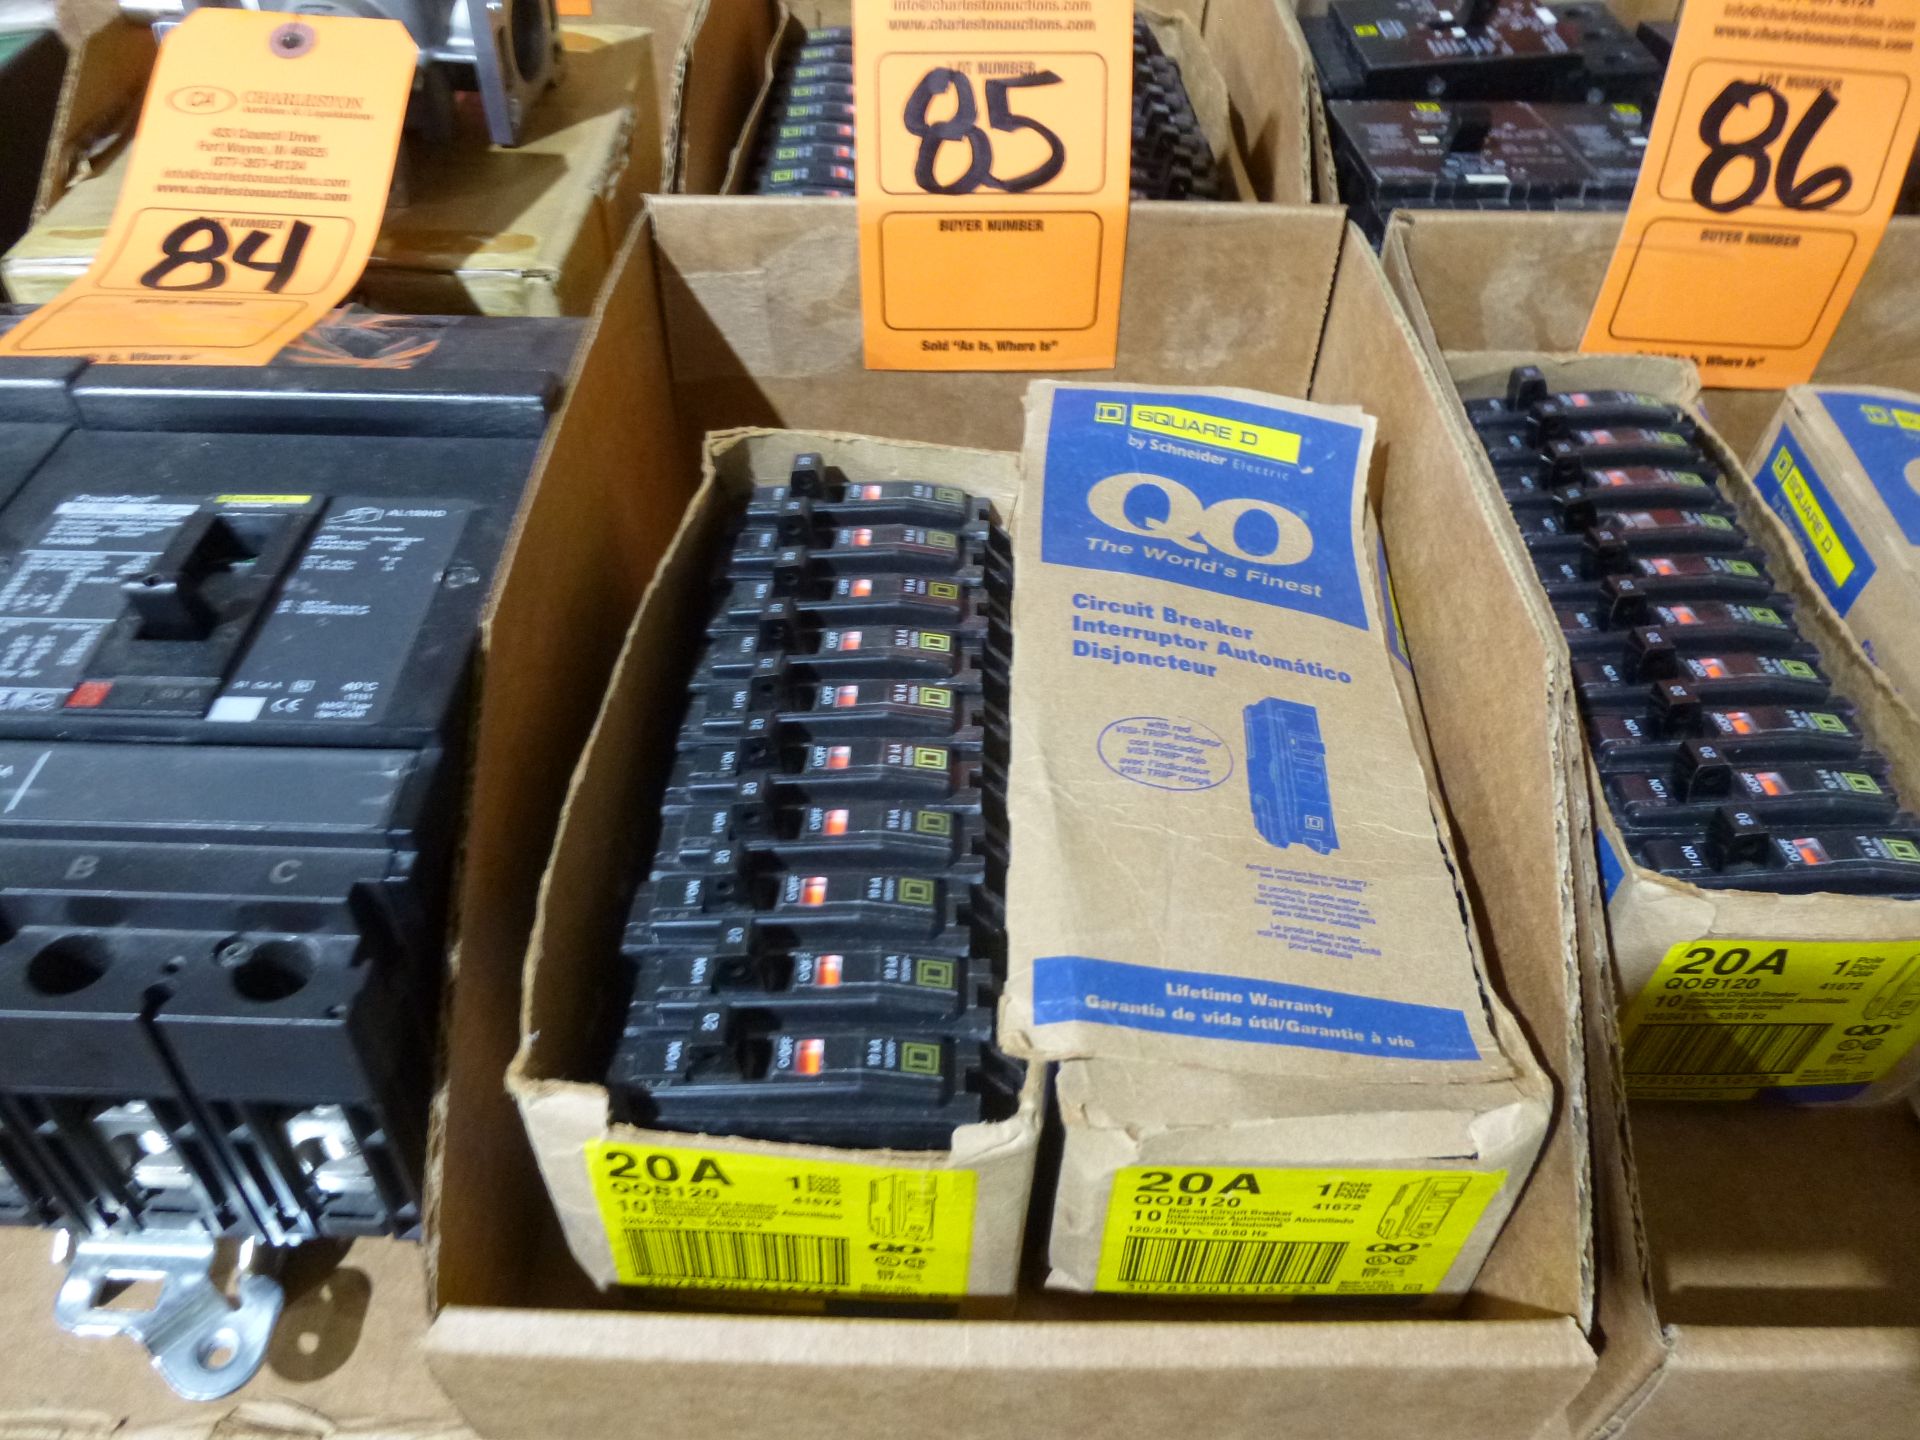 Qty 20 Square D 20 amp breakers Model QOB120, new in boxes as pictrued, as always with Brolyn LLC